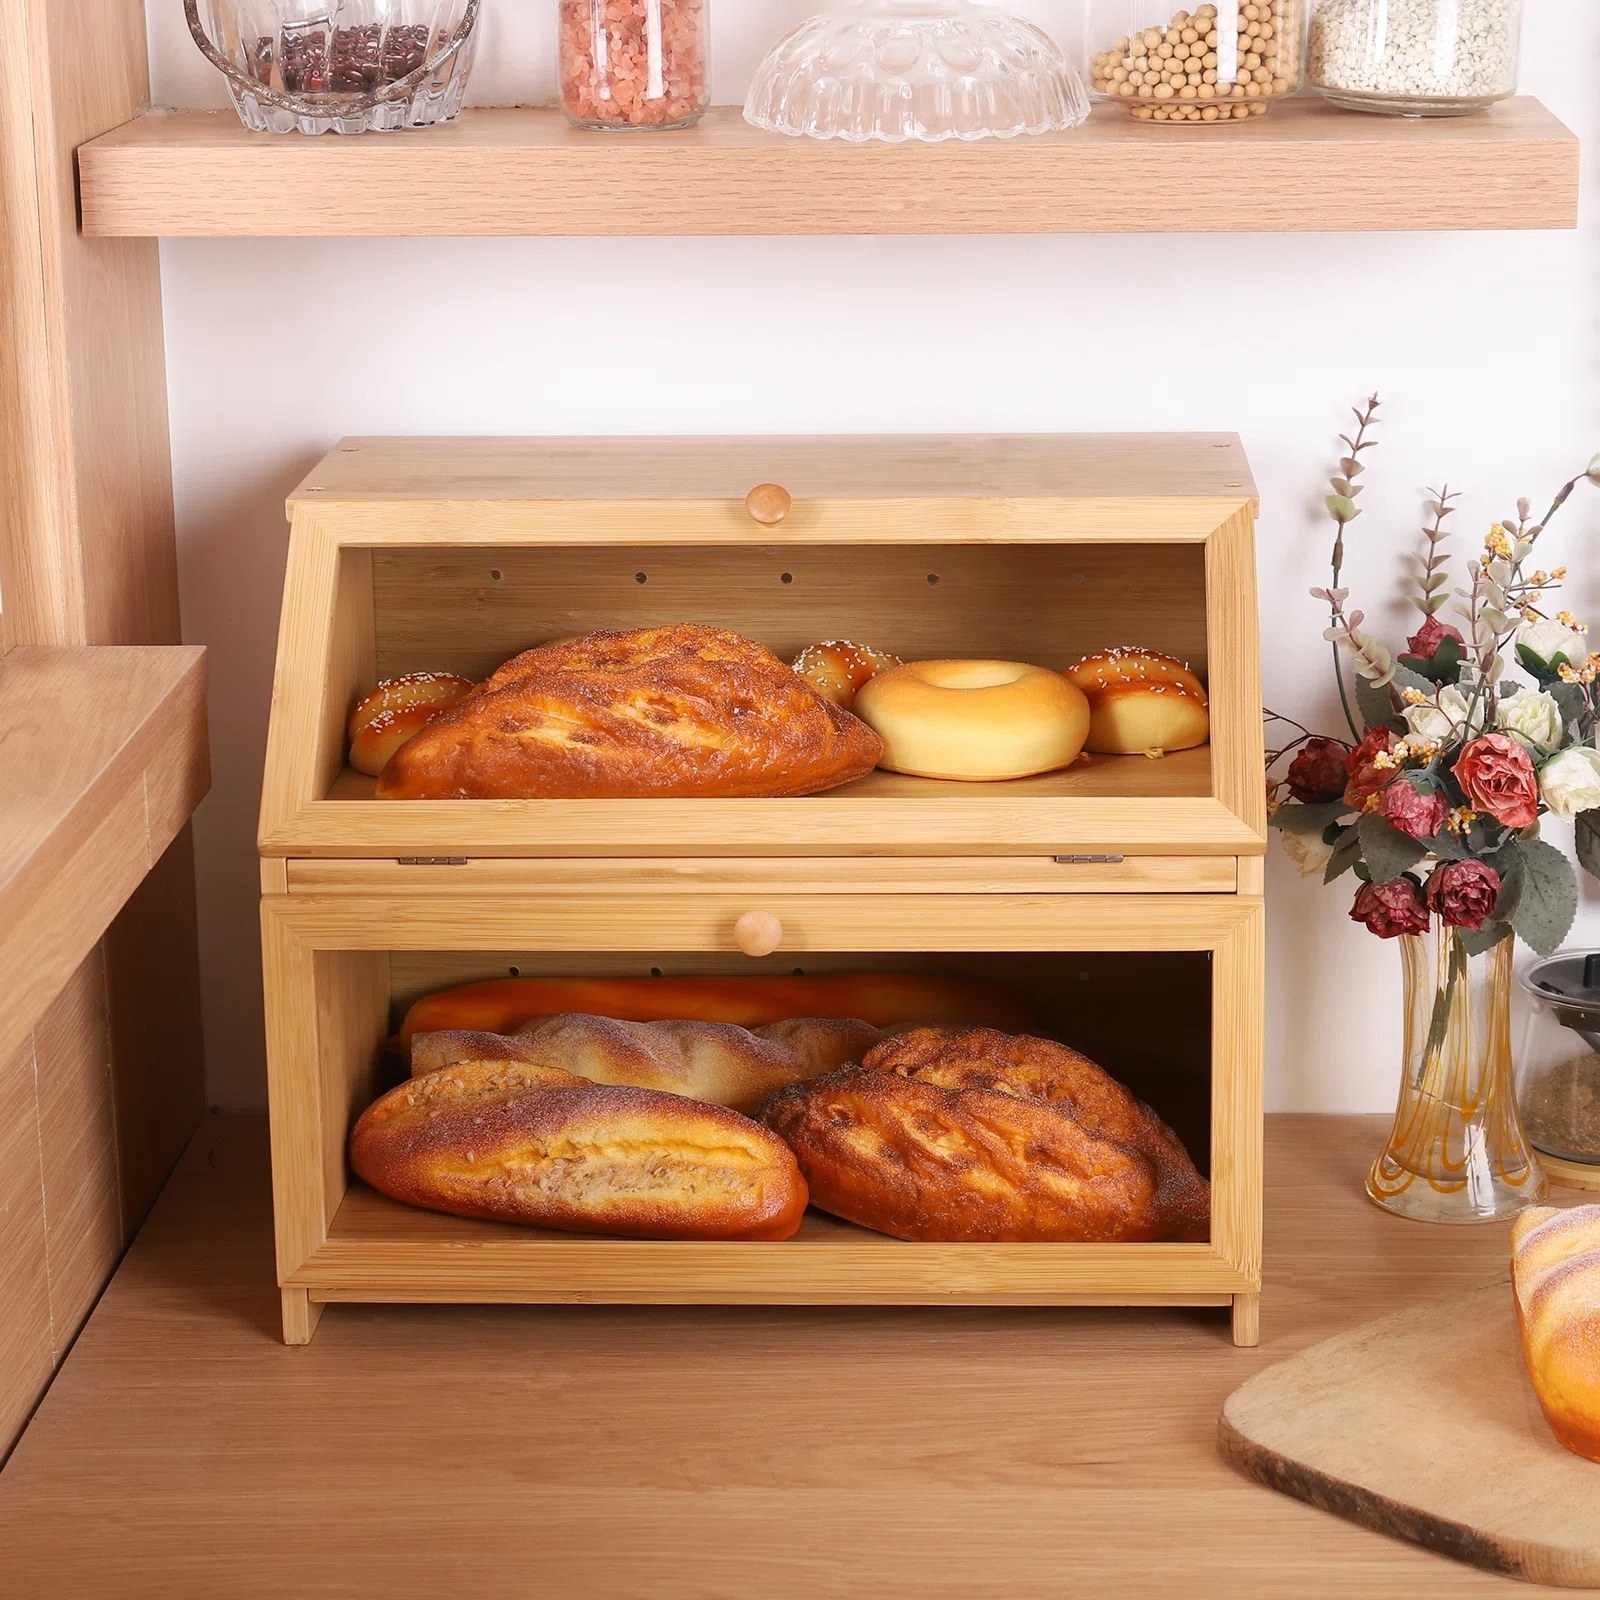 an oak bread box holding bread loafs and bagels